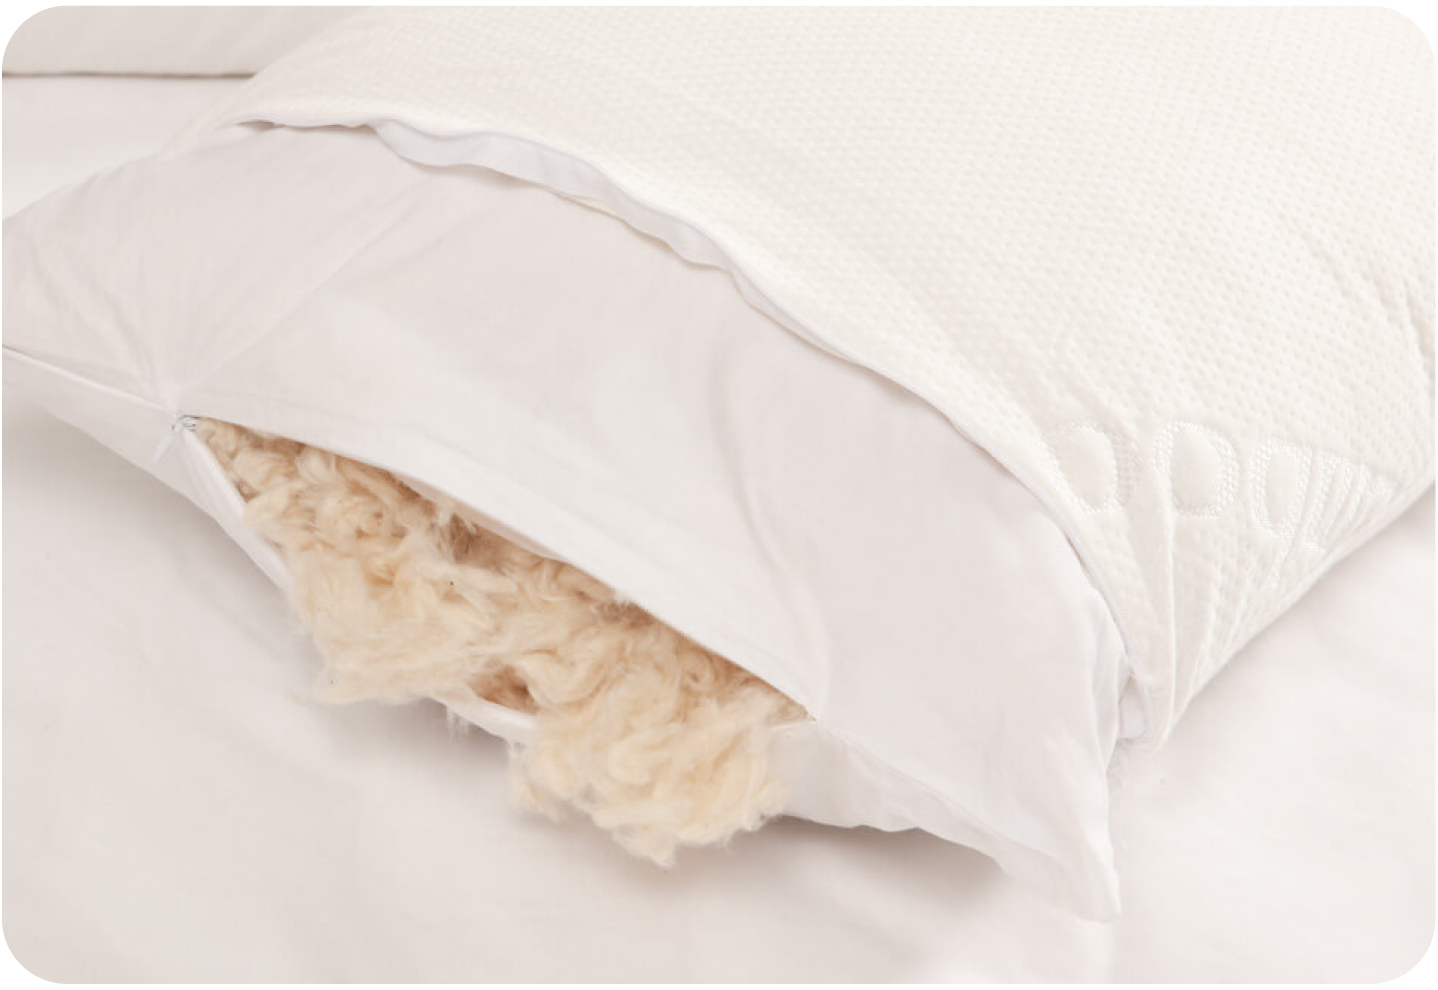 Our Kamboo Kapok Filled Adjustable Pillow with its natural fibre fill displayed